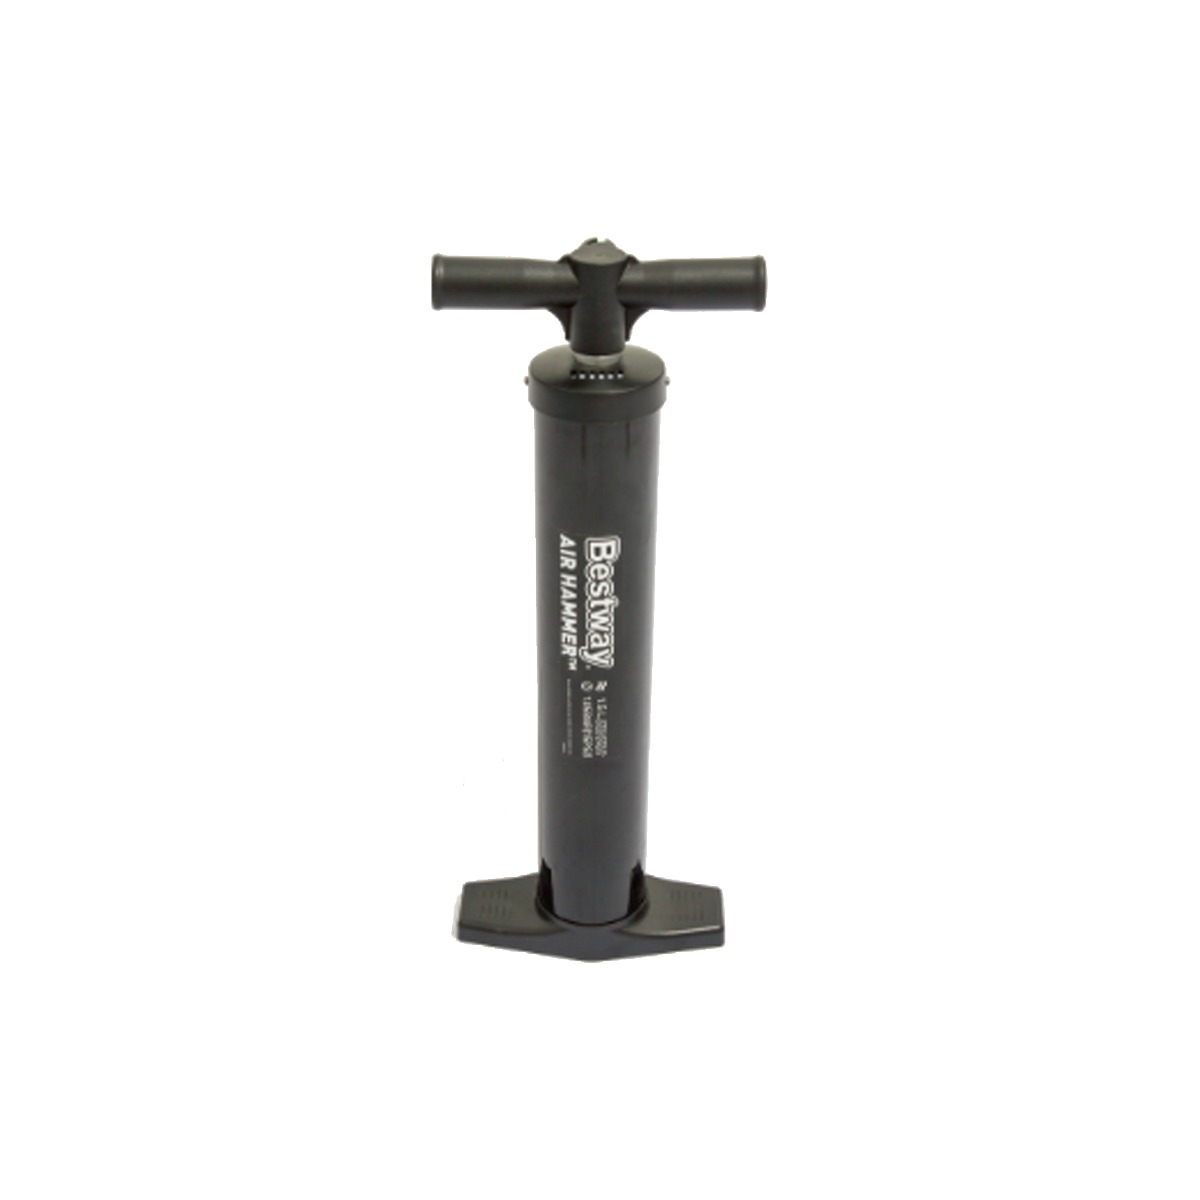 An image of High-Pressure Hand Pump for Drop Stitch Models | Small Parts | Lay-Z-Spa